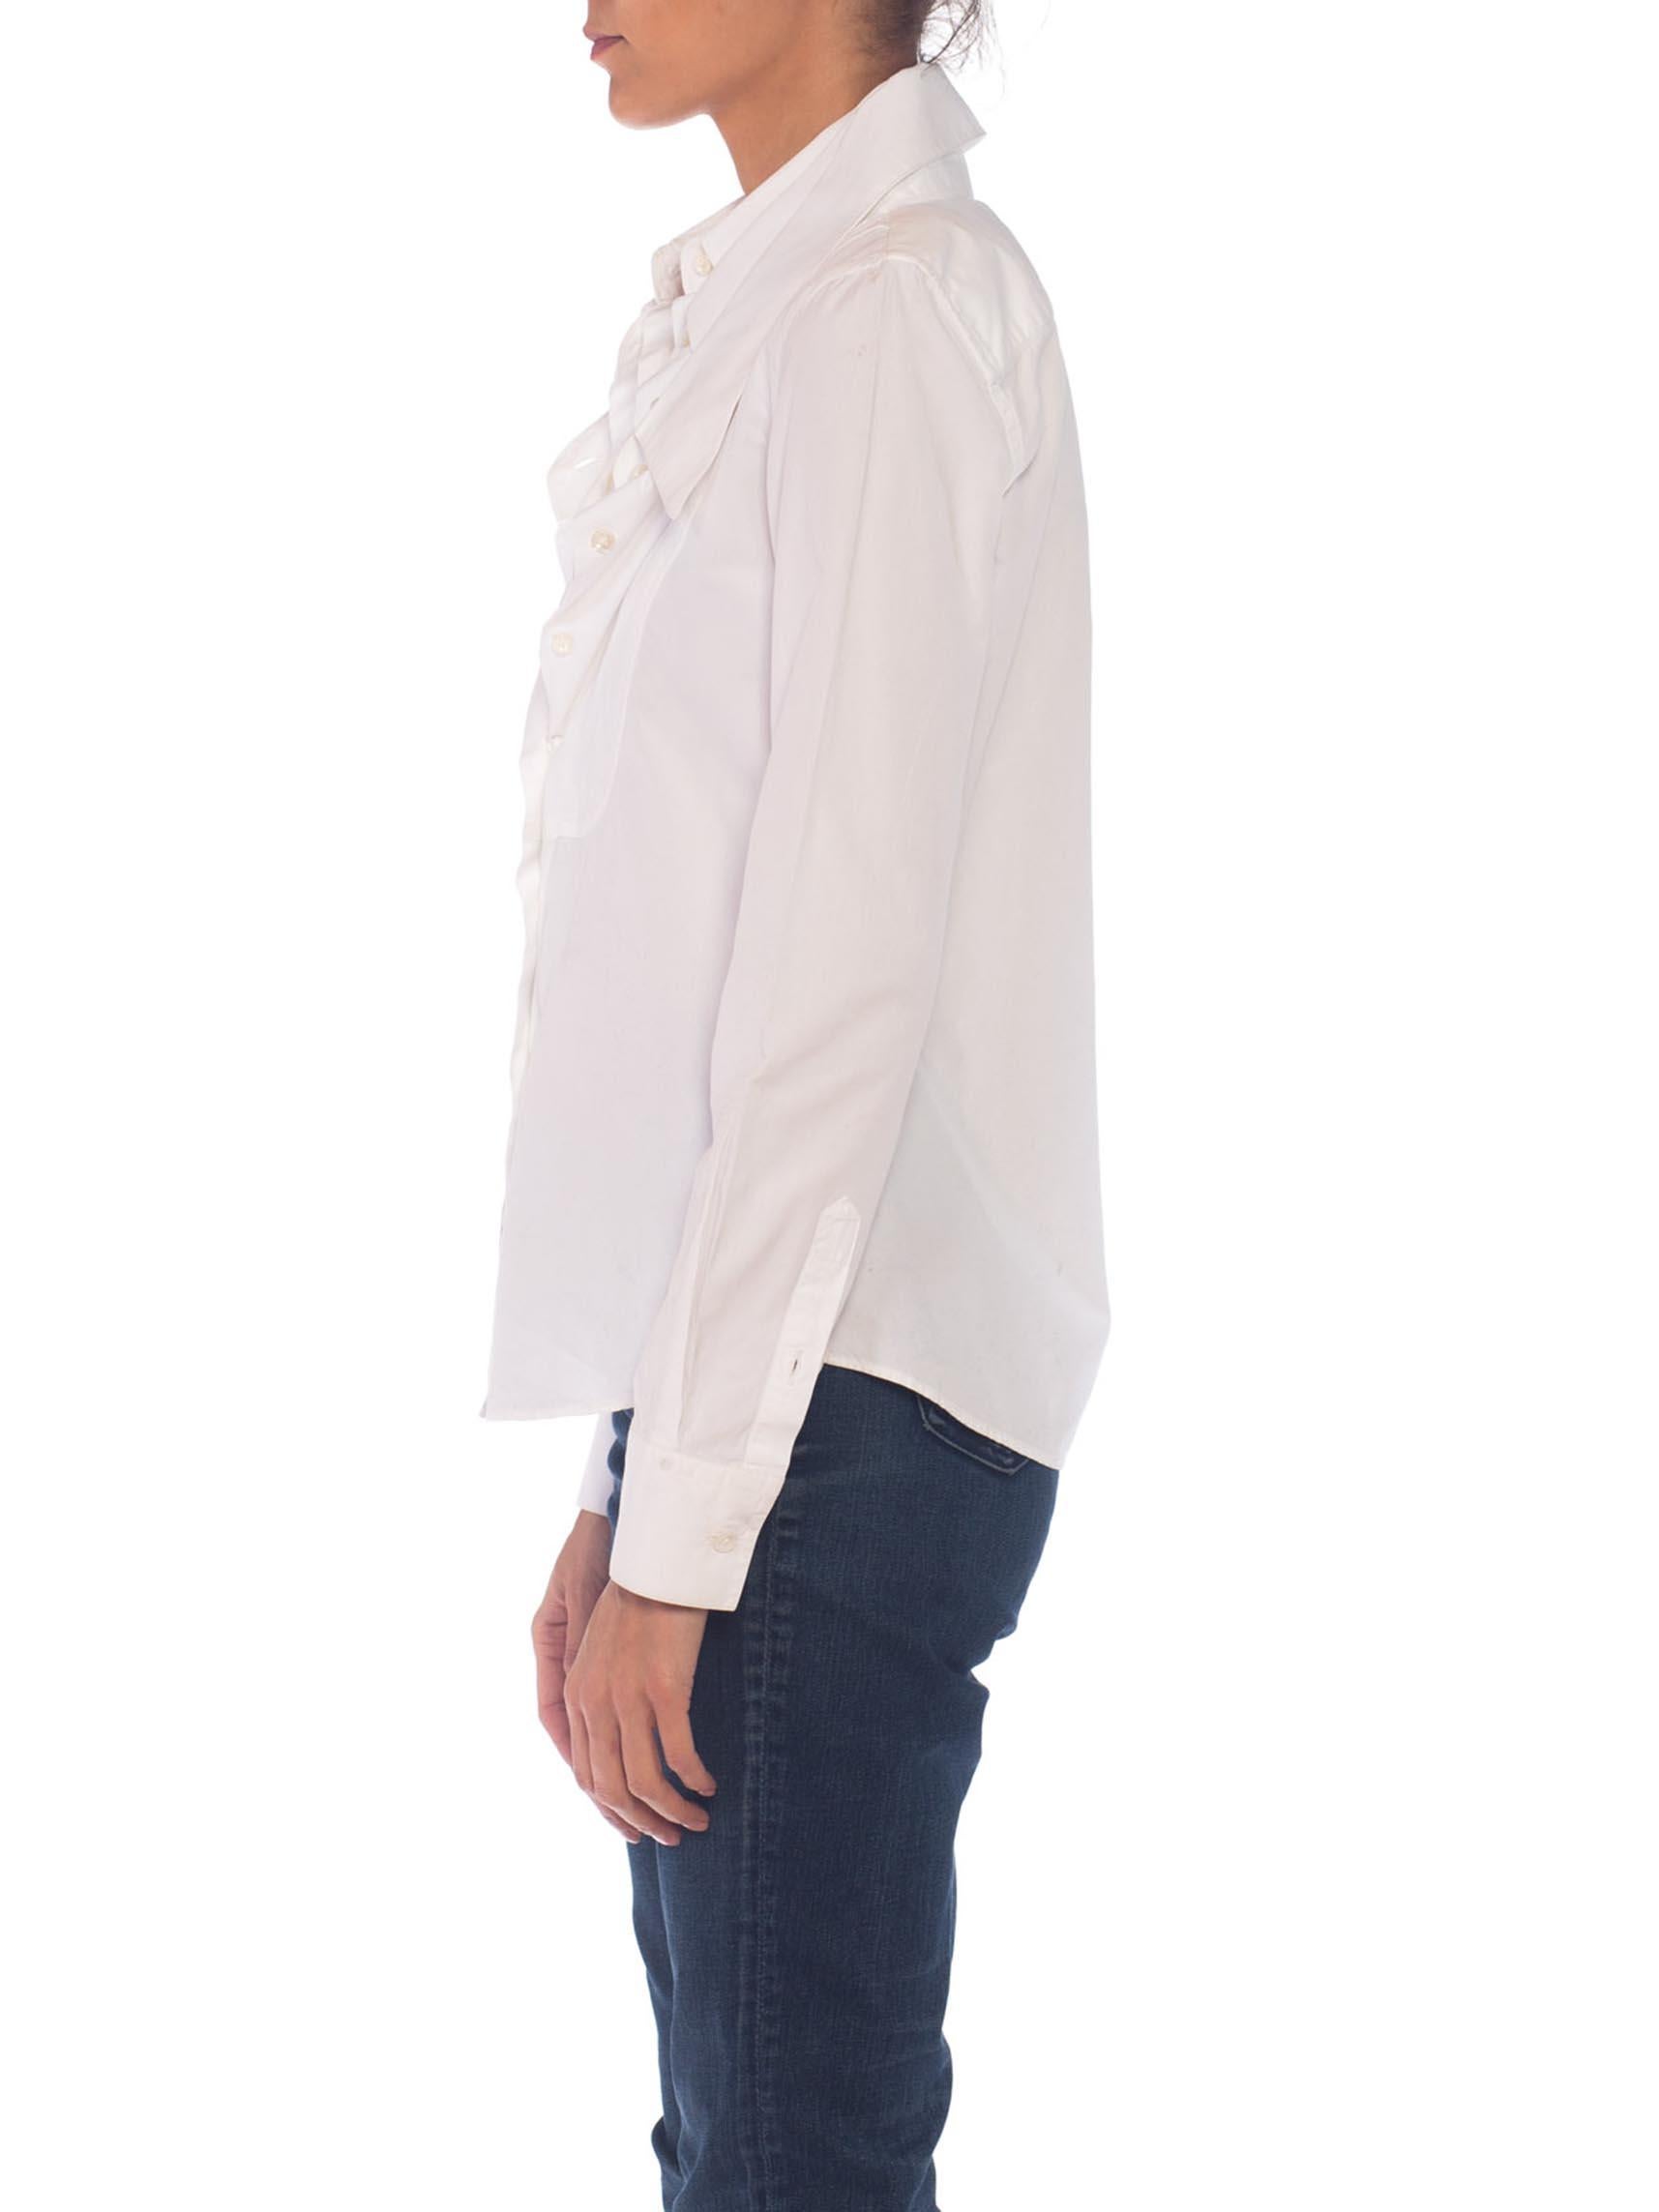 1990S VIKTOR & ROLF White Cotton Iconic Multi Collar Shirt In Excellent Condition For Sale In New York, NY